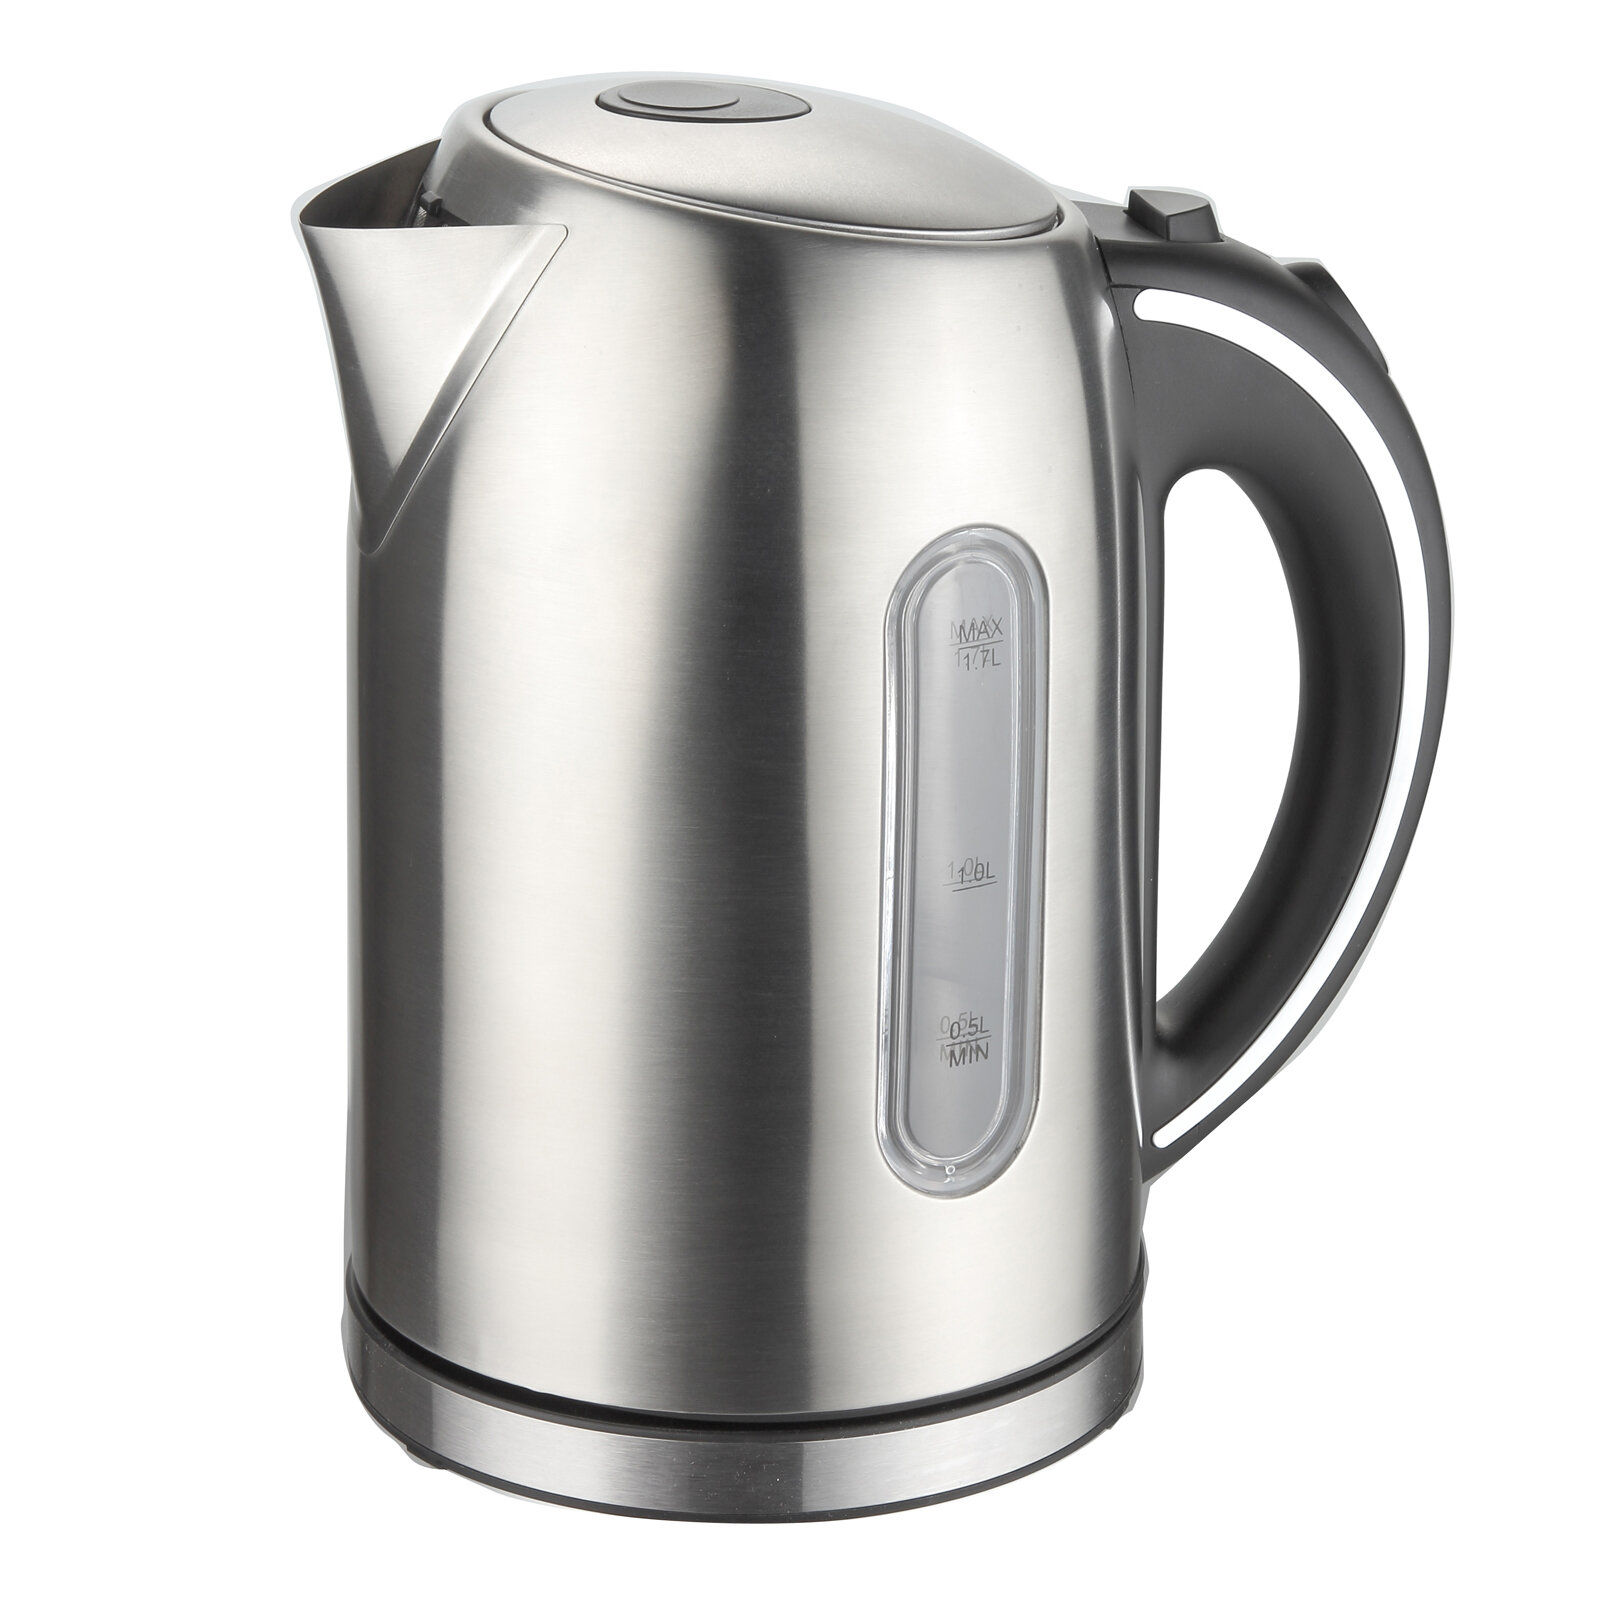 Proctor Silex 1.8 qt. Stainless Steel Electric tea Kettle & Reviews